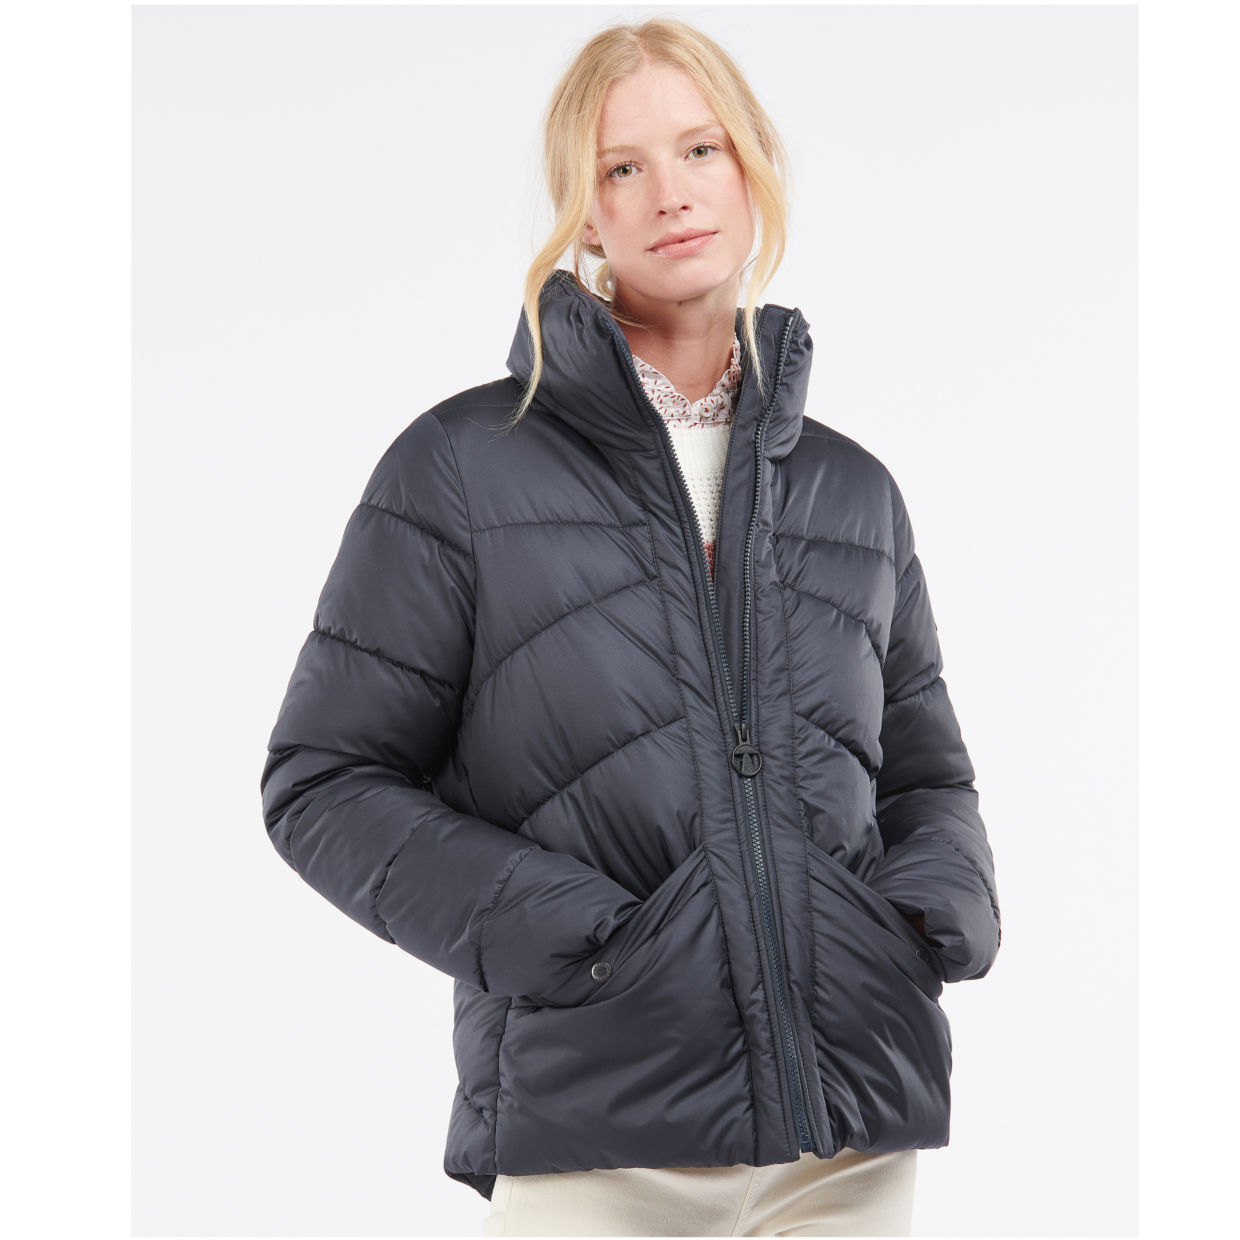 Barbour Cabot Puffer Quilt